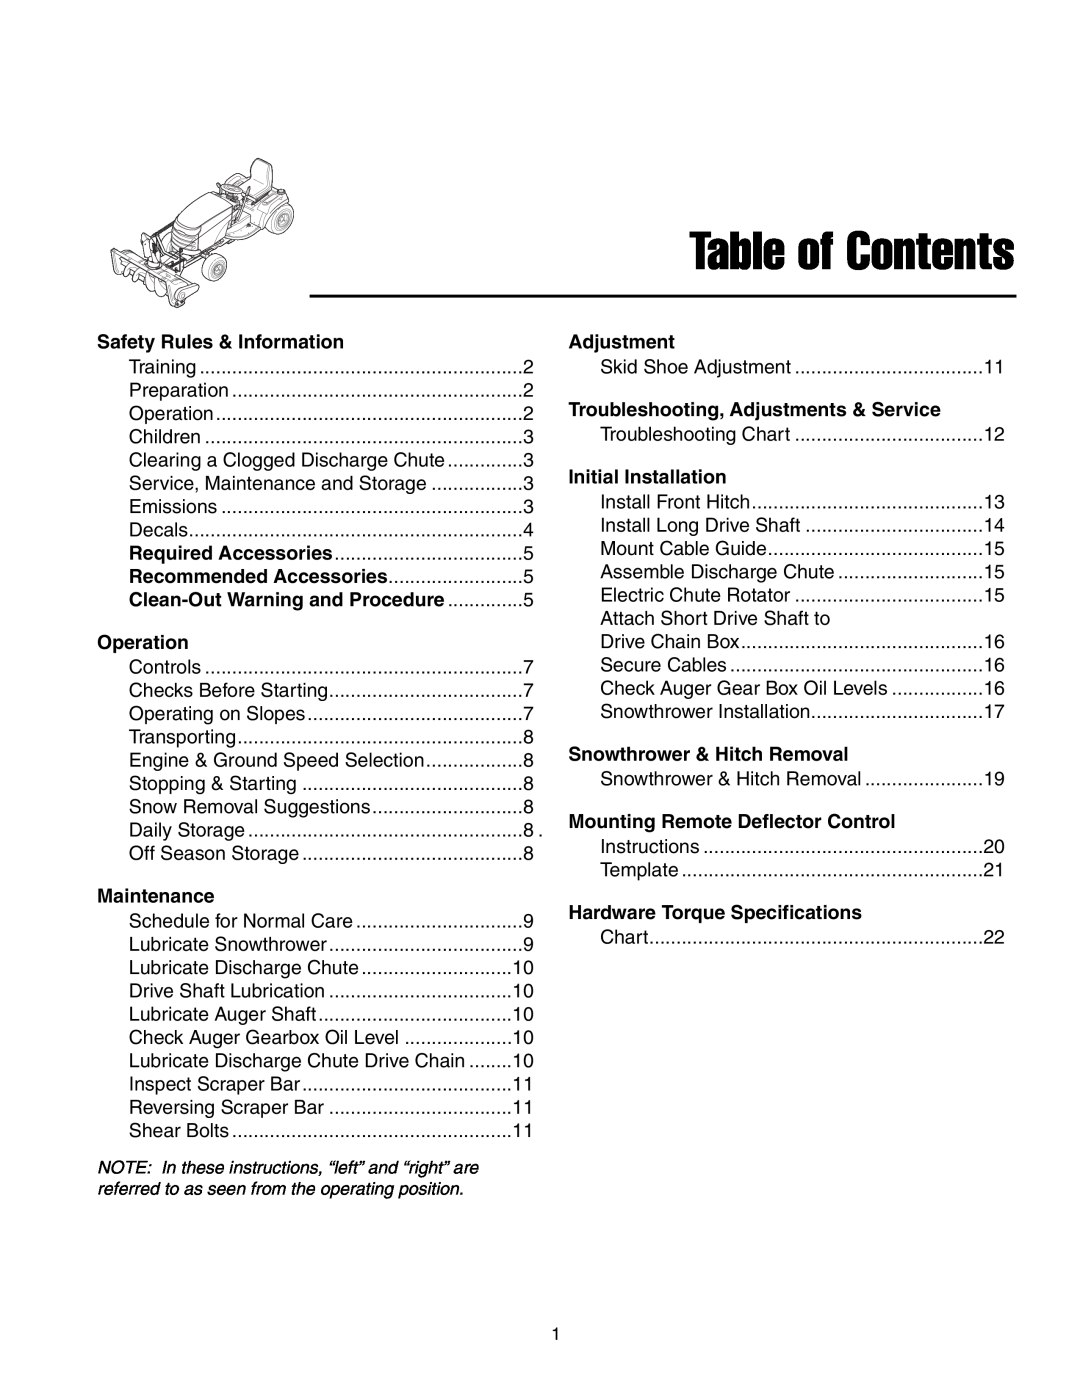 Simplicity 1694404 Table of Contents, Safety Rules & Information, Operation, Maintenance, Adjustment, Initial Installation 